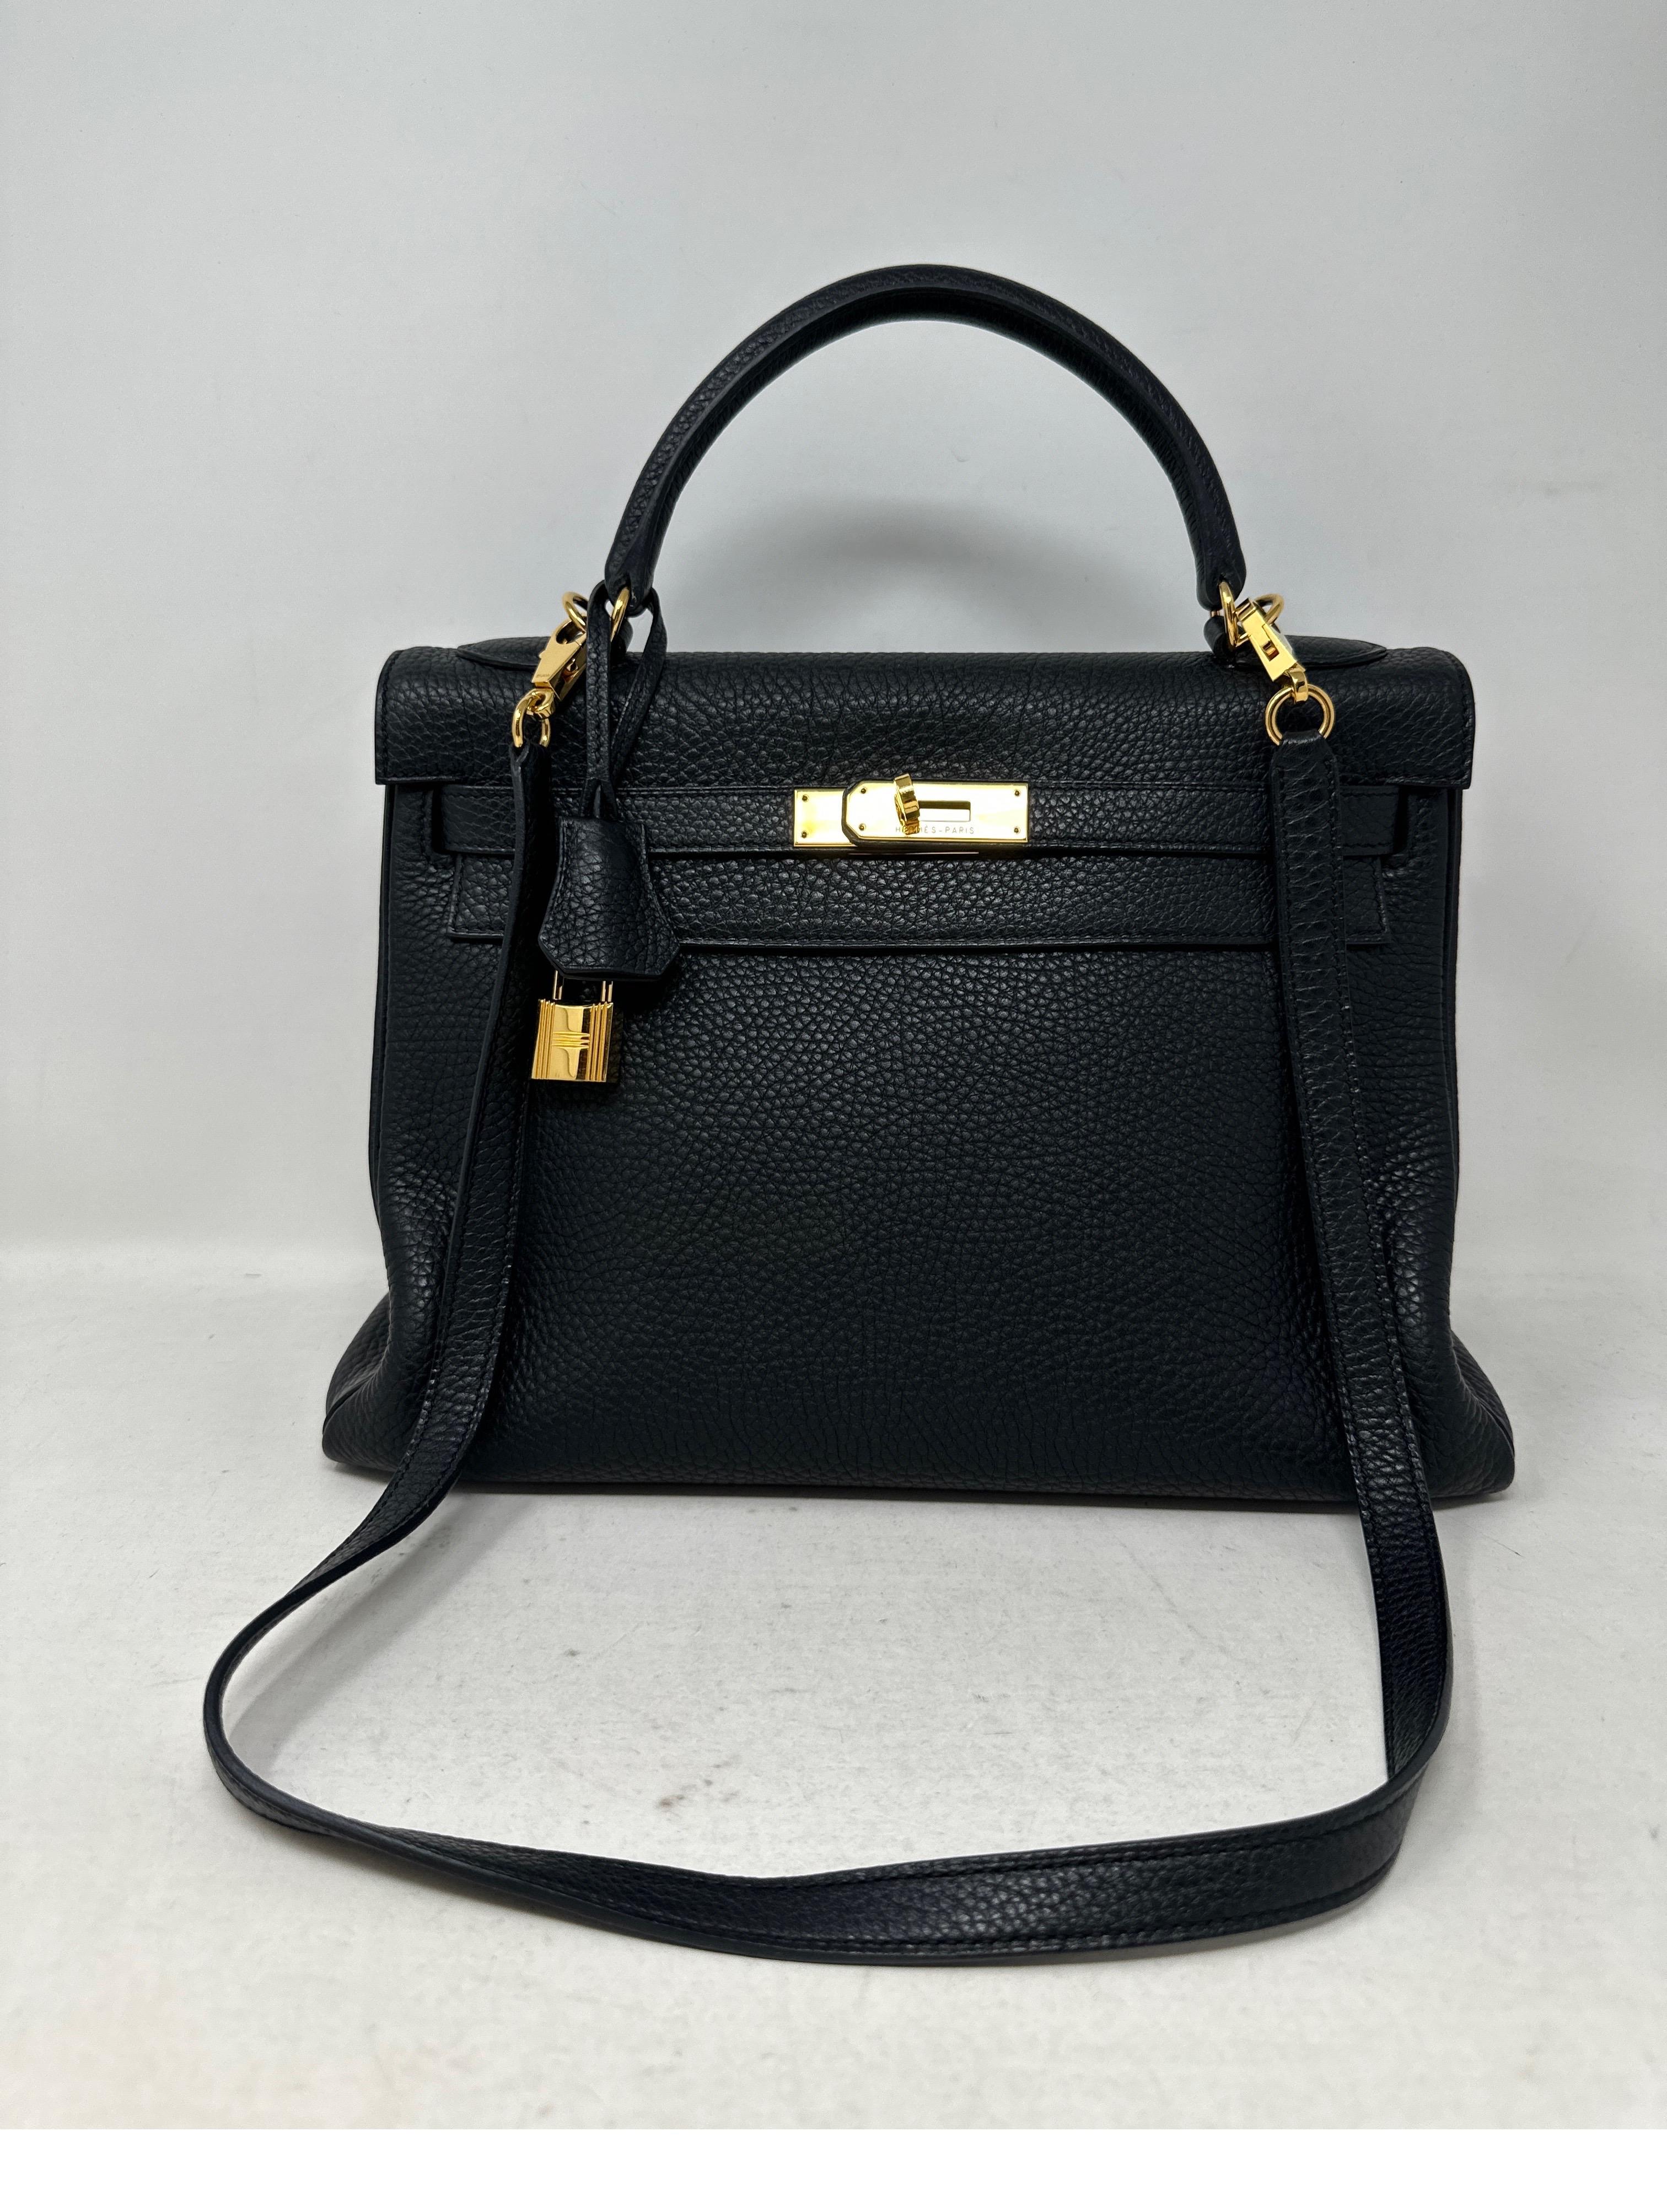 Hermes Black Kelly 28 Bag. Togo leather with gold hardware. Excellent condition. Harder to find size Kelly. Interior clean. Great investment bag. Black with gold is most wanted. Includes clcohette, lock, keys, and dust bag. Guaranteed authentic. 